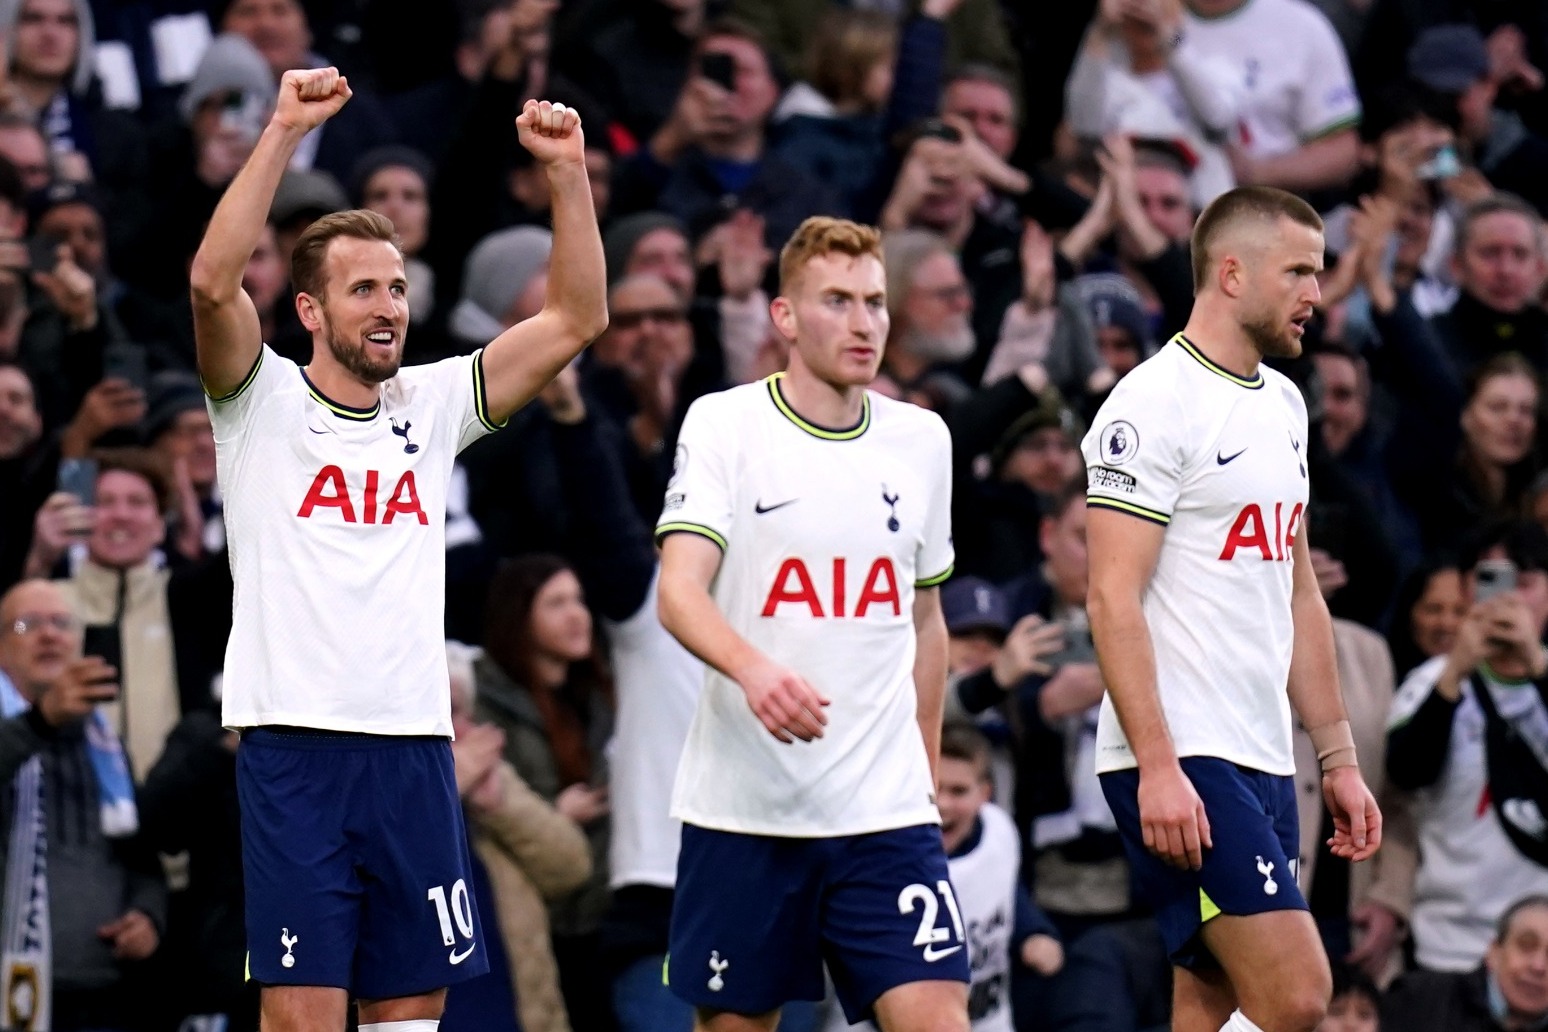 Spurs help rivals Arsenal after shocking second placed City 